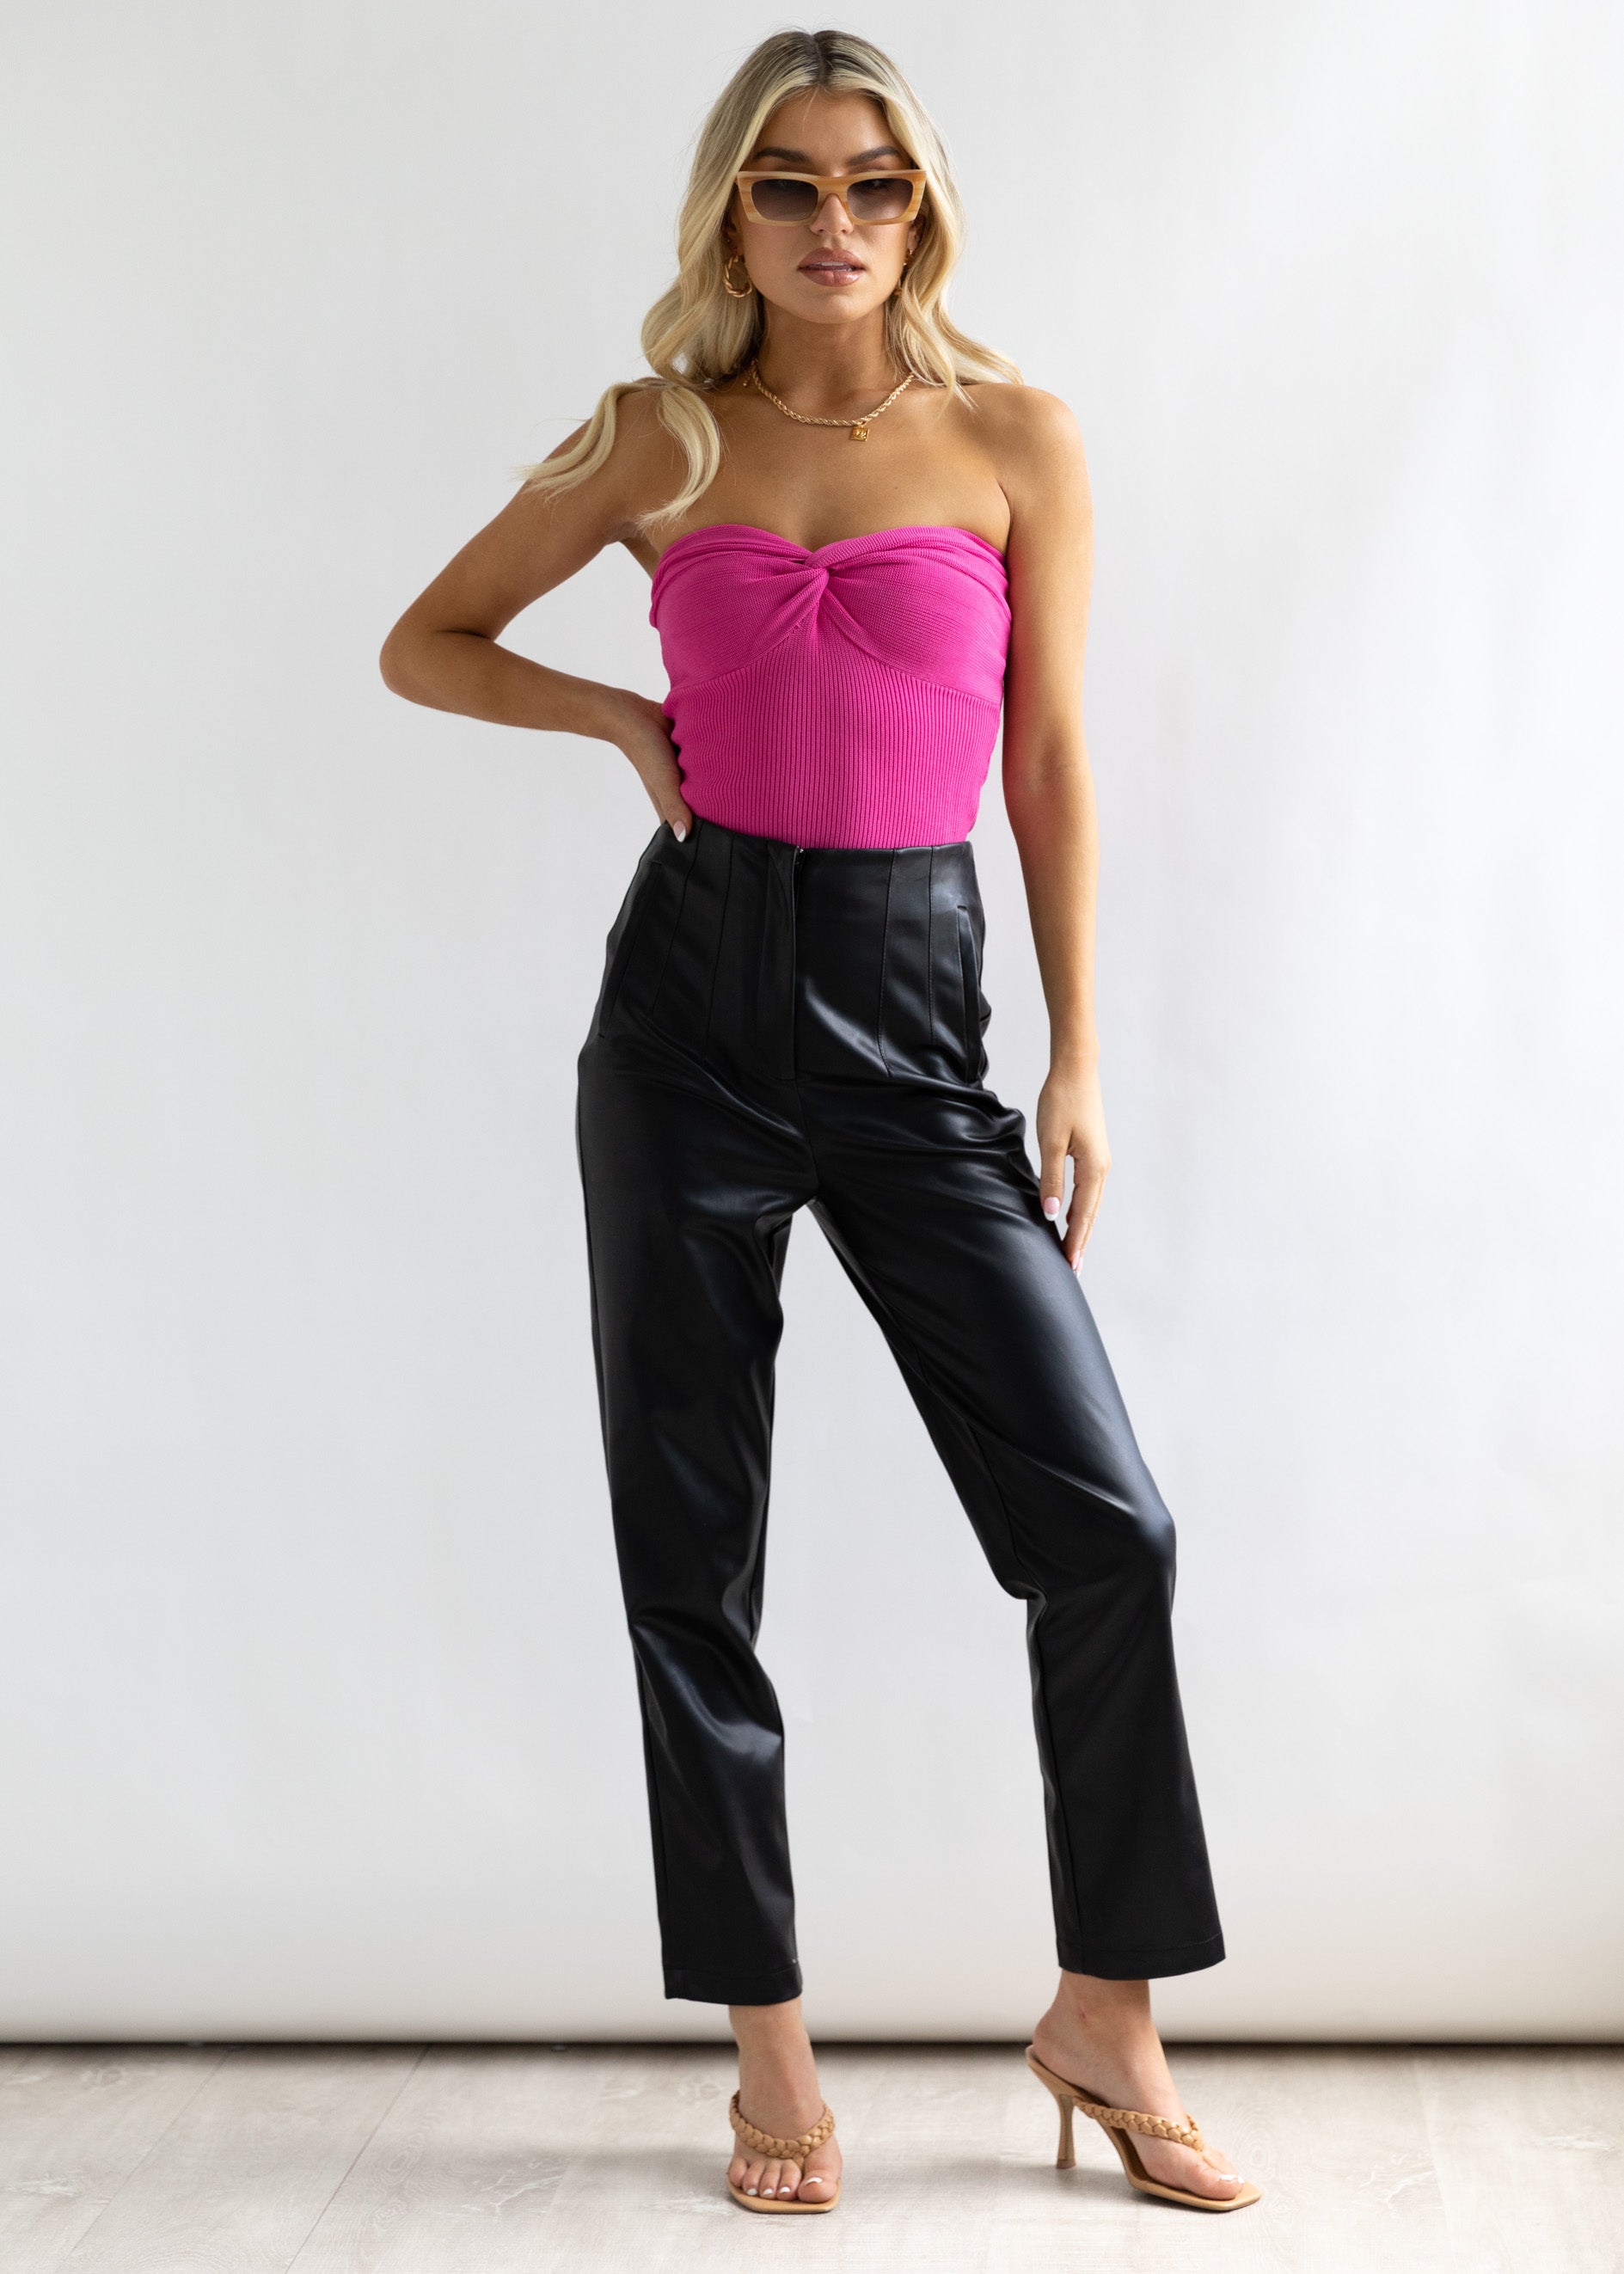 Devini Strapless Knit Top - Hot Pink